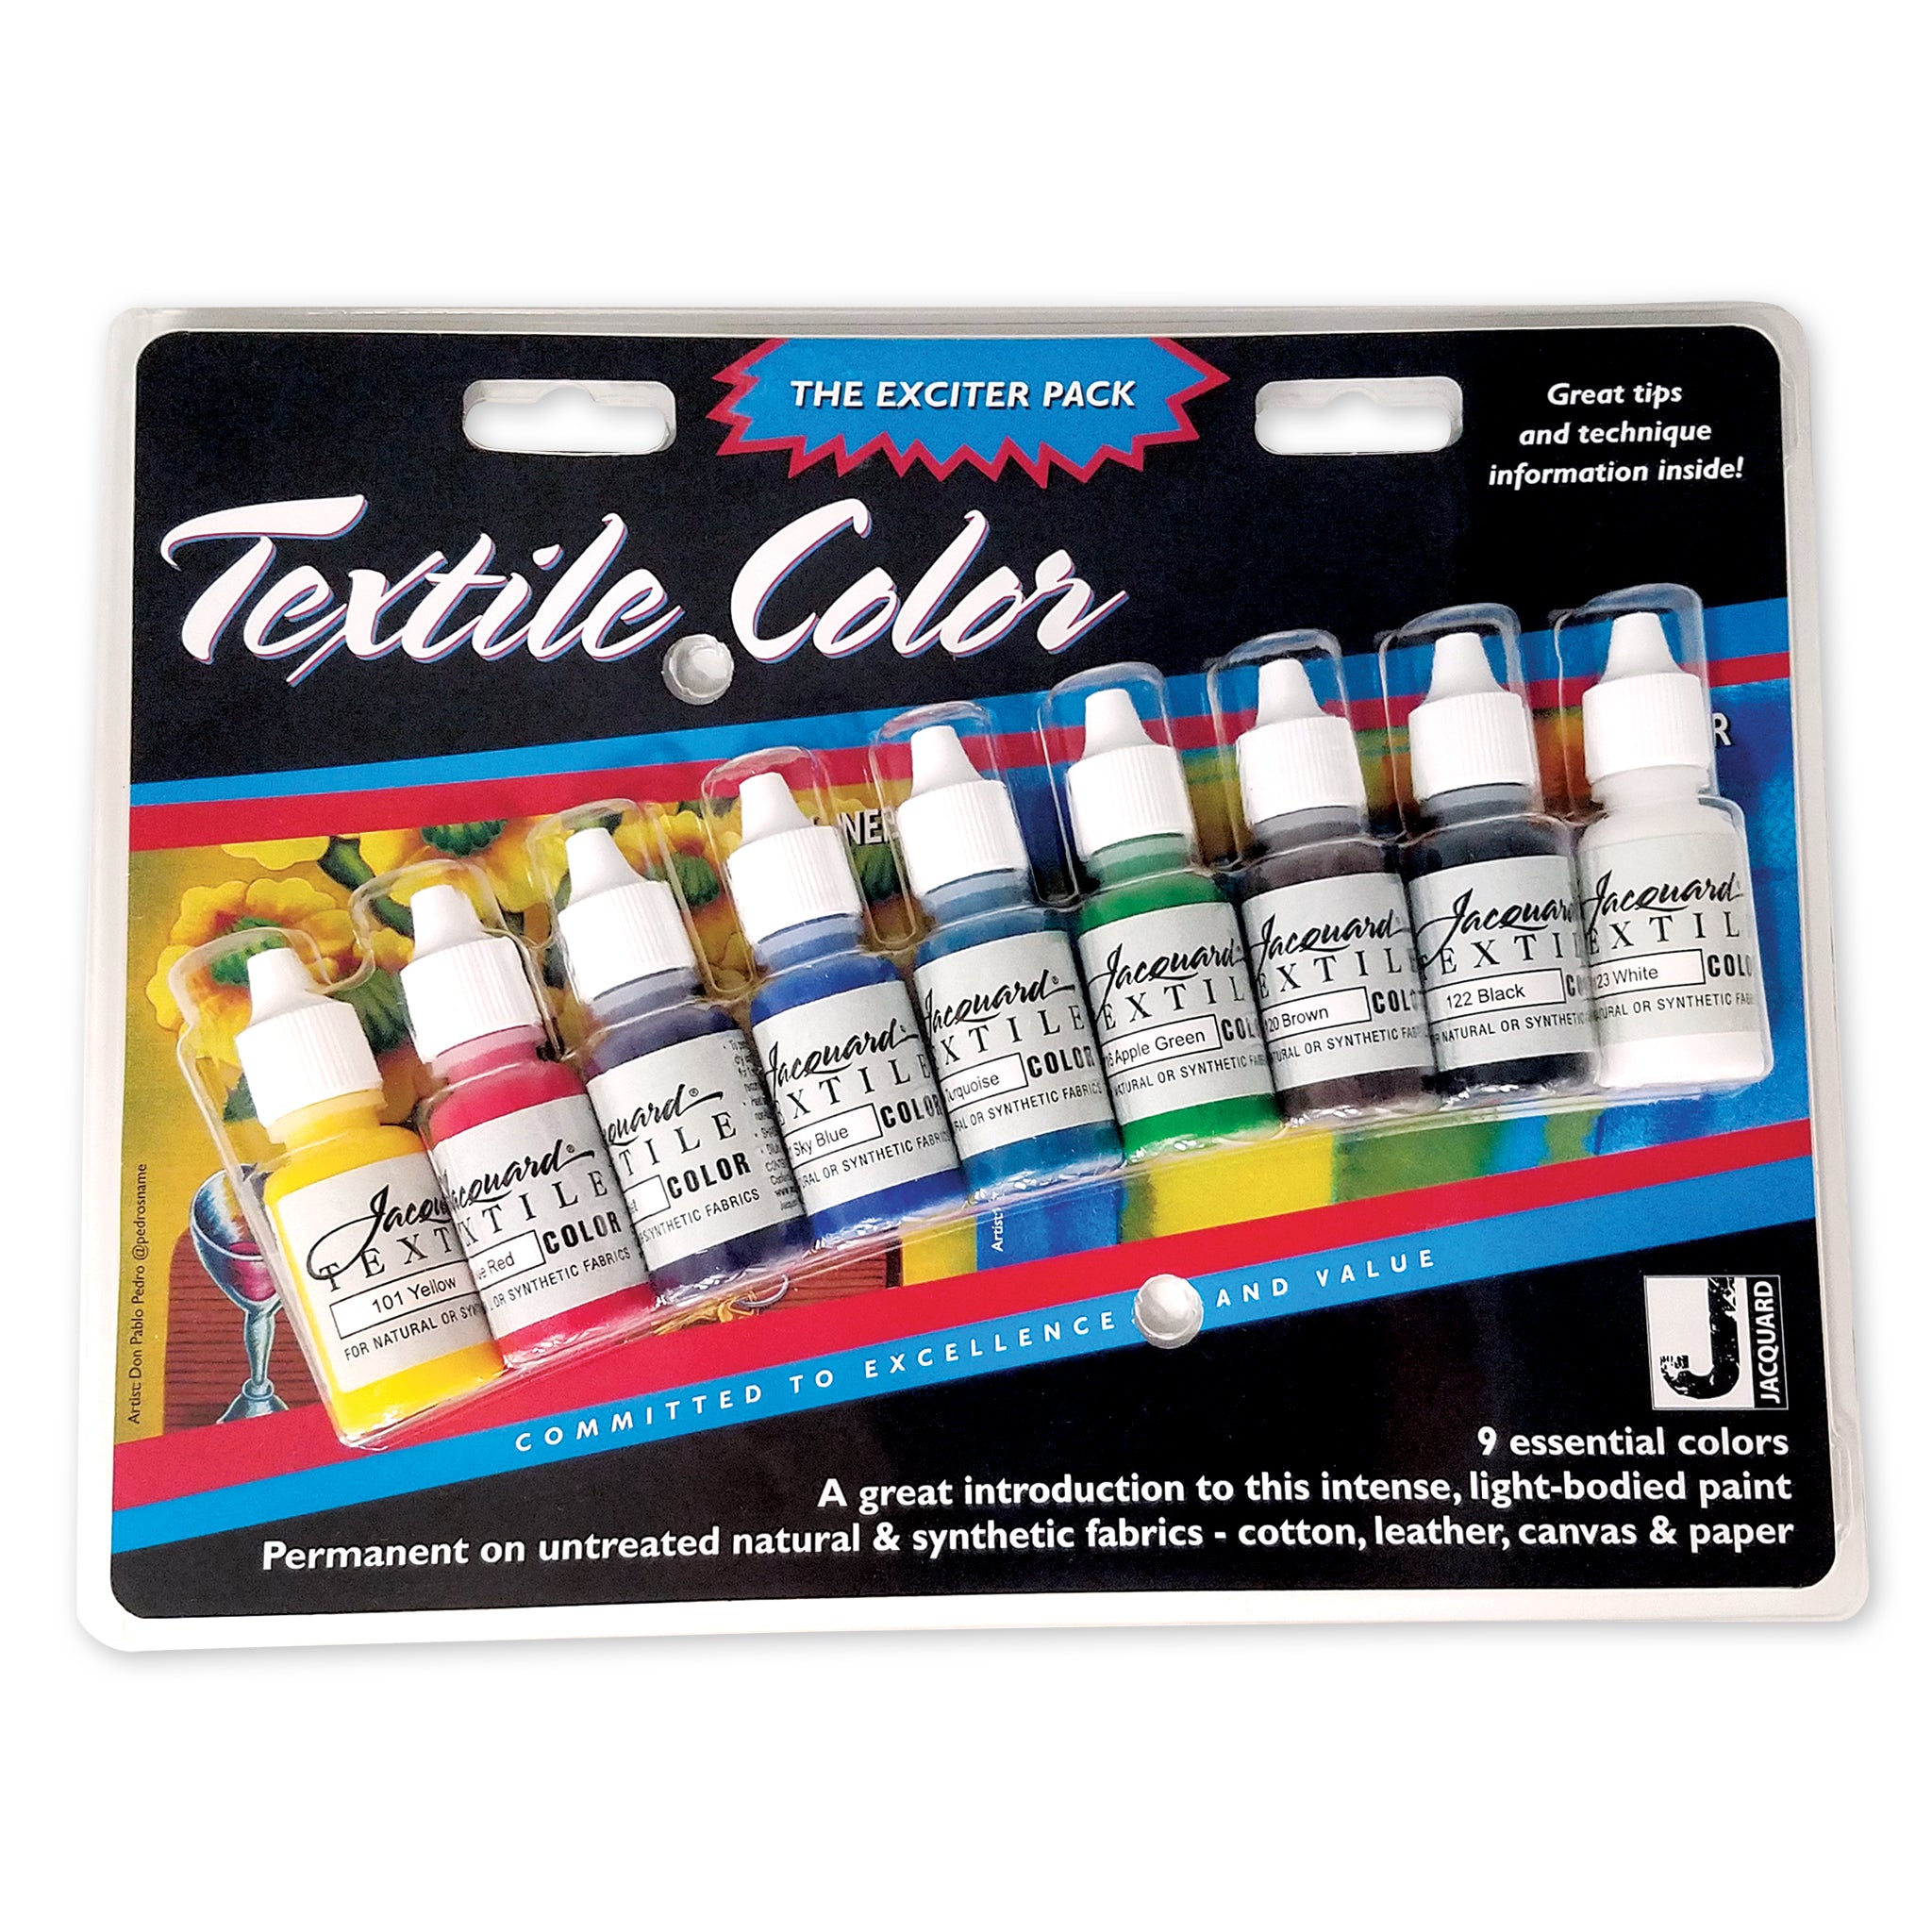 Textile Color Exciter Pack